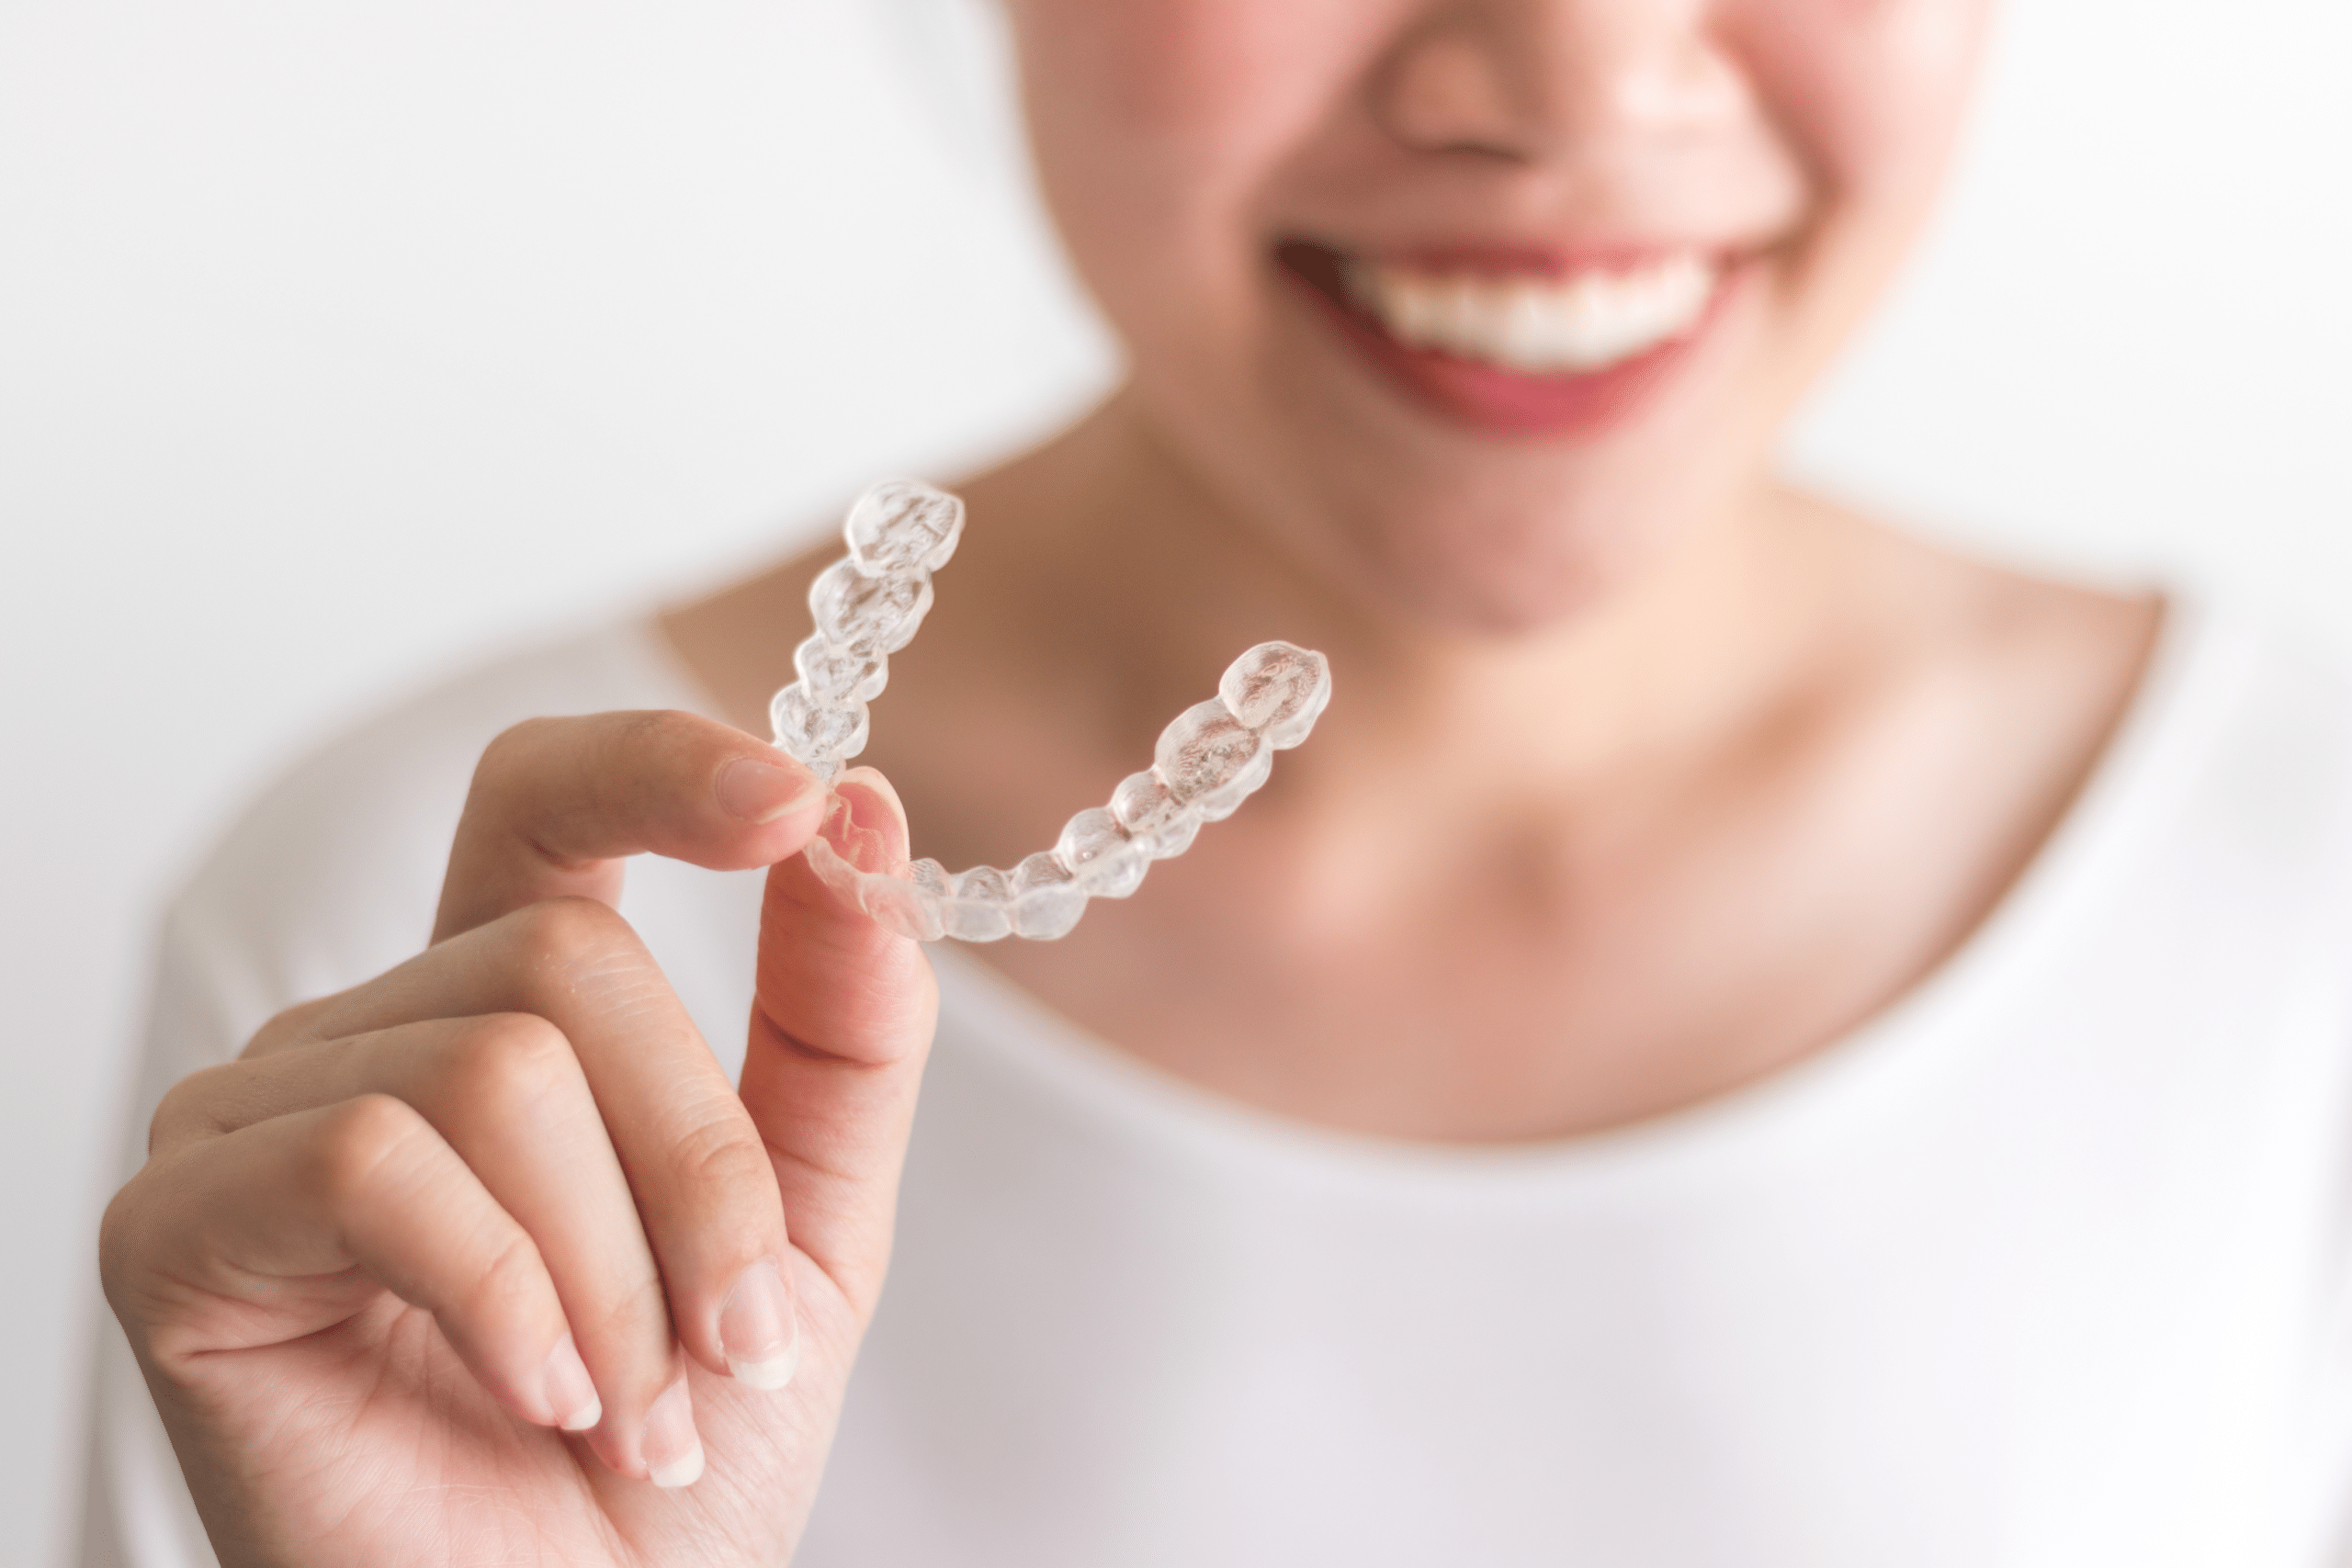 Is Invisalign Better Than Braces?